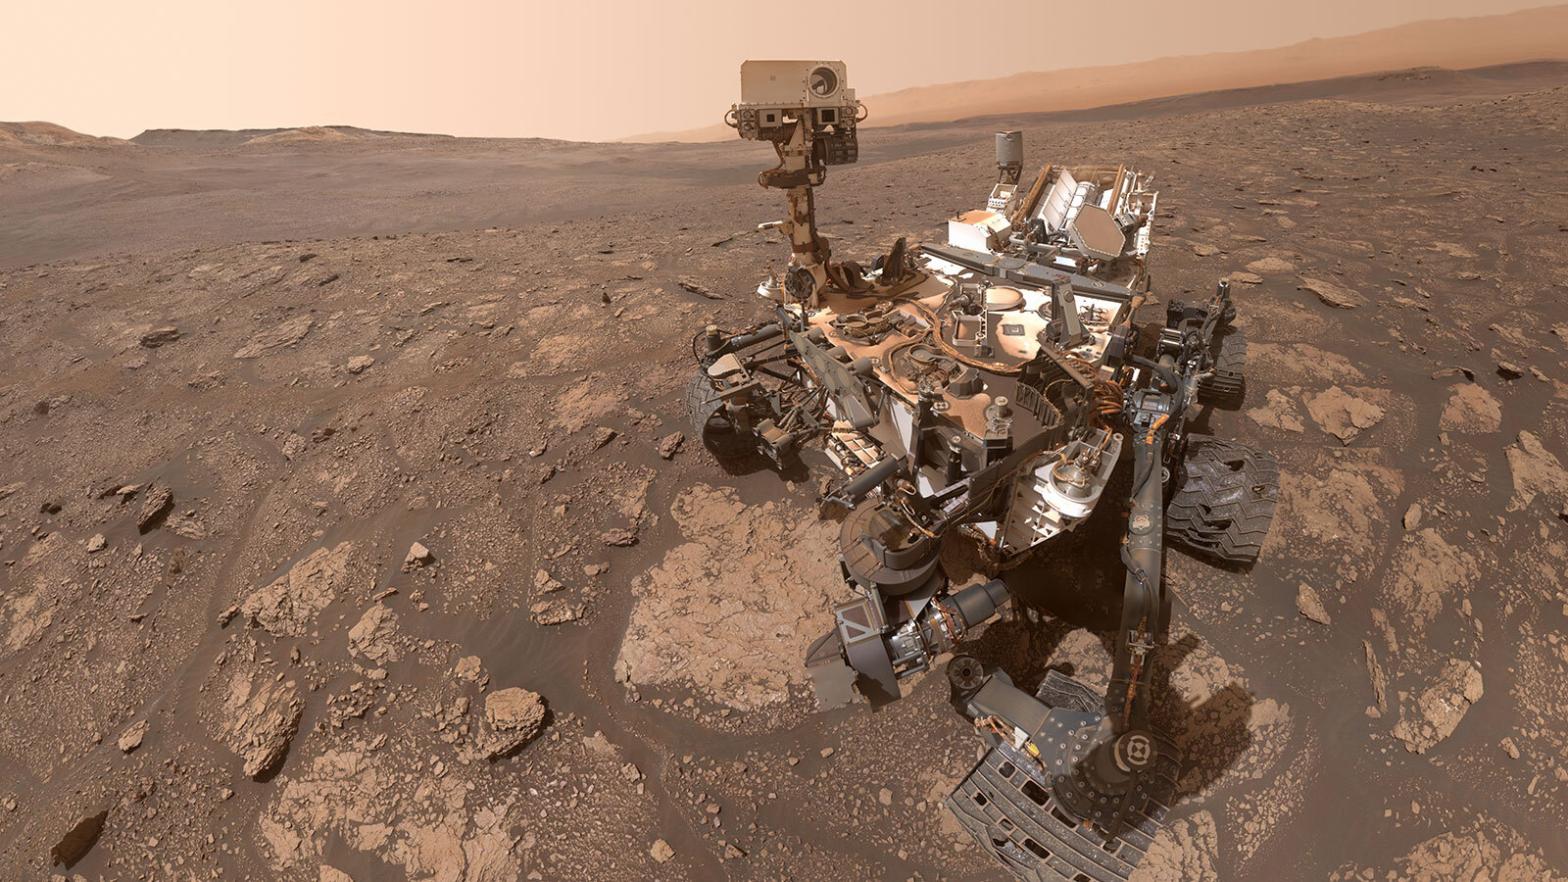 The Curiosity selfie was stitched together from 59 individual images.  (Image: NASA)